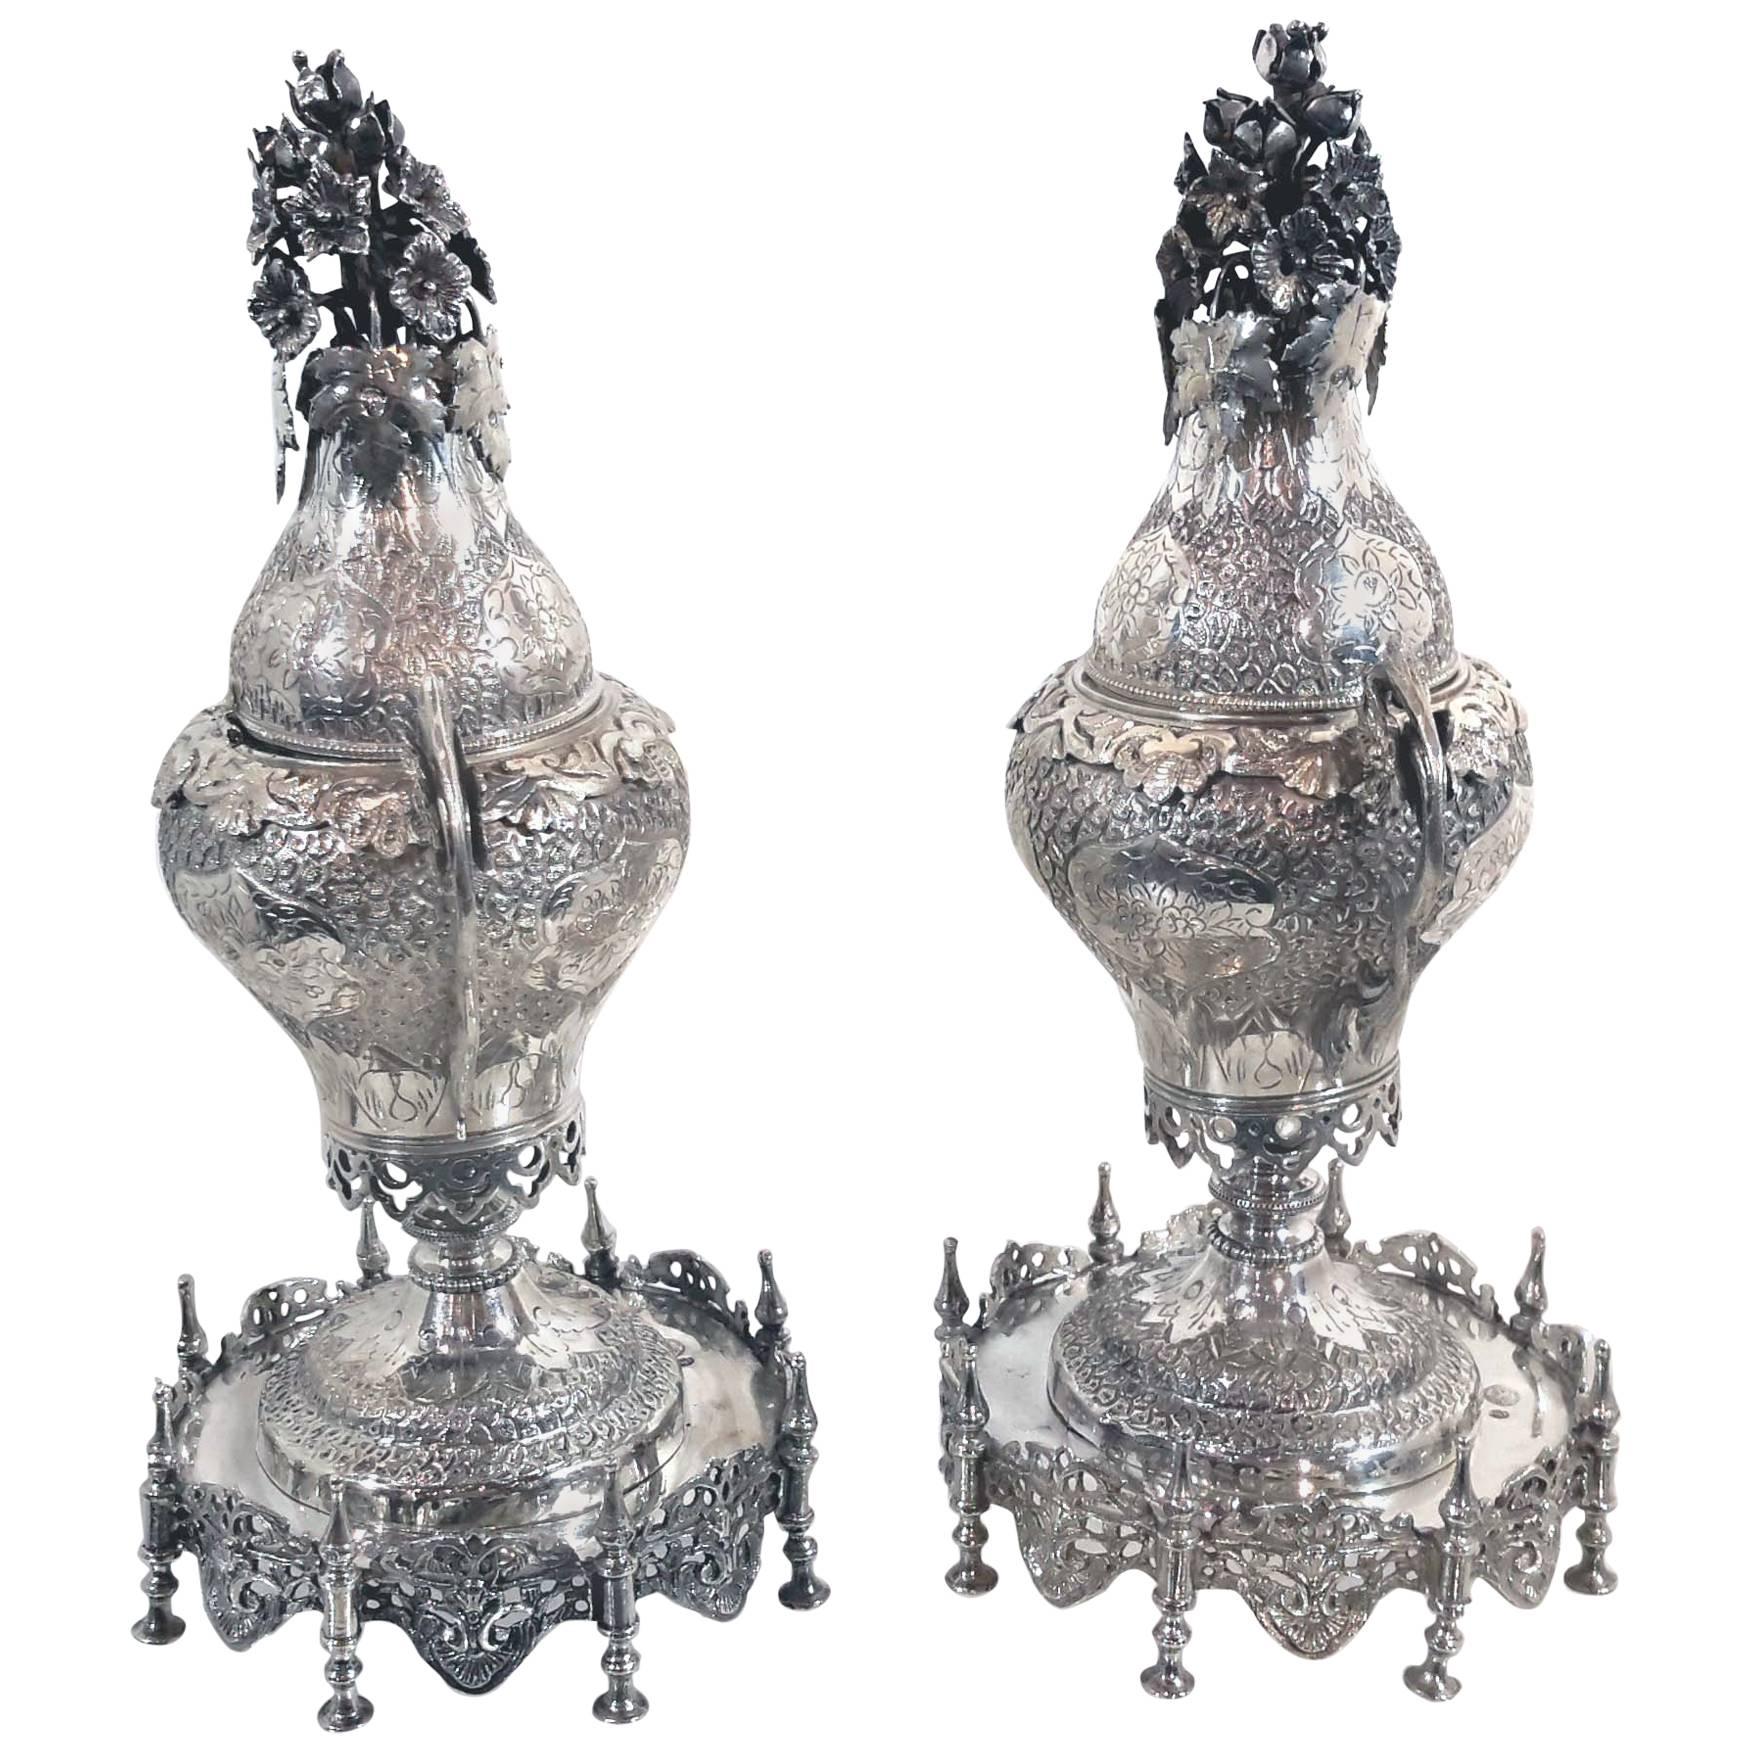 Pair of Ottoman Silver Spice & Rosewater Containers, Turkey, 19th Century